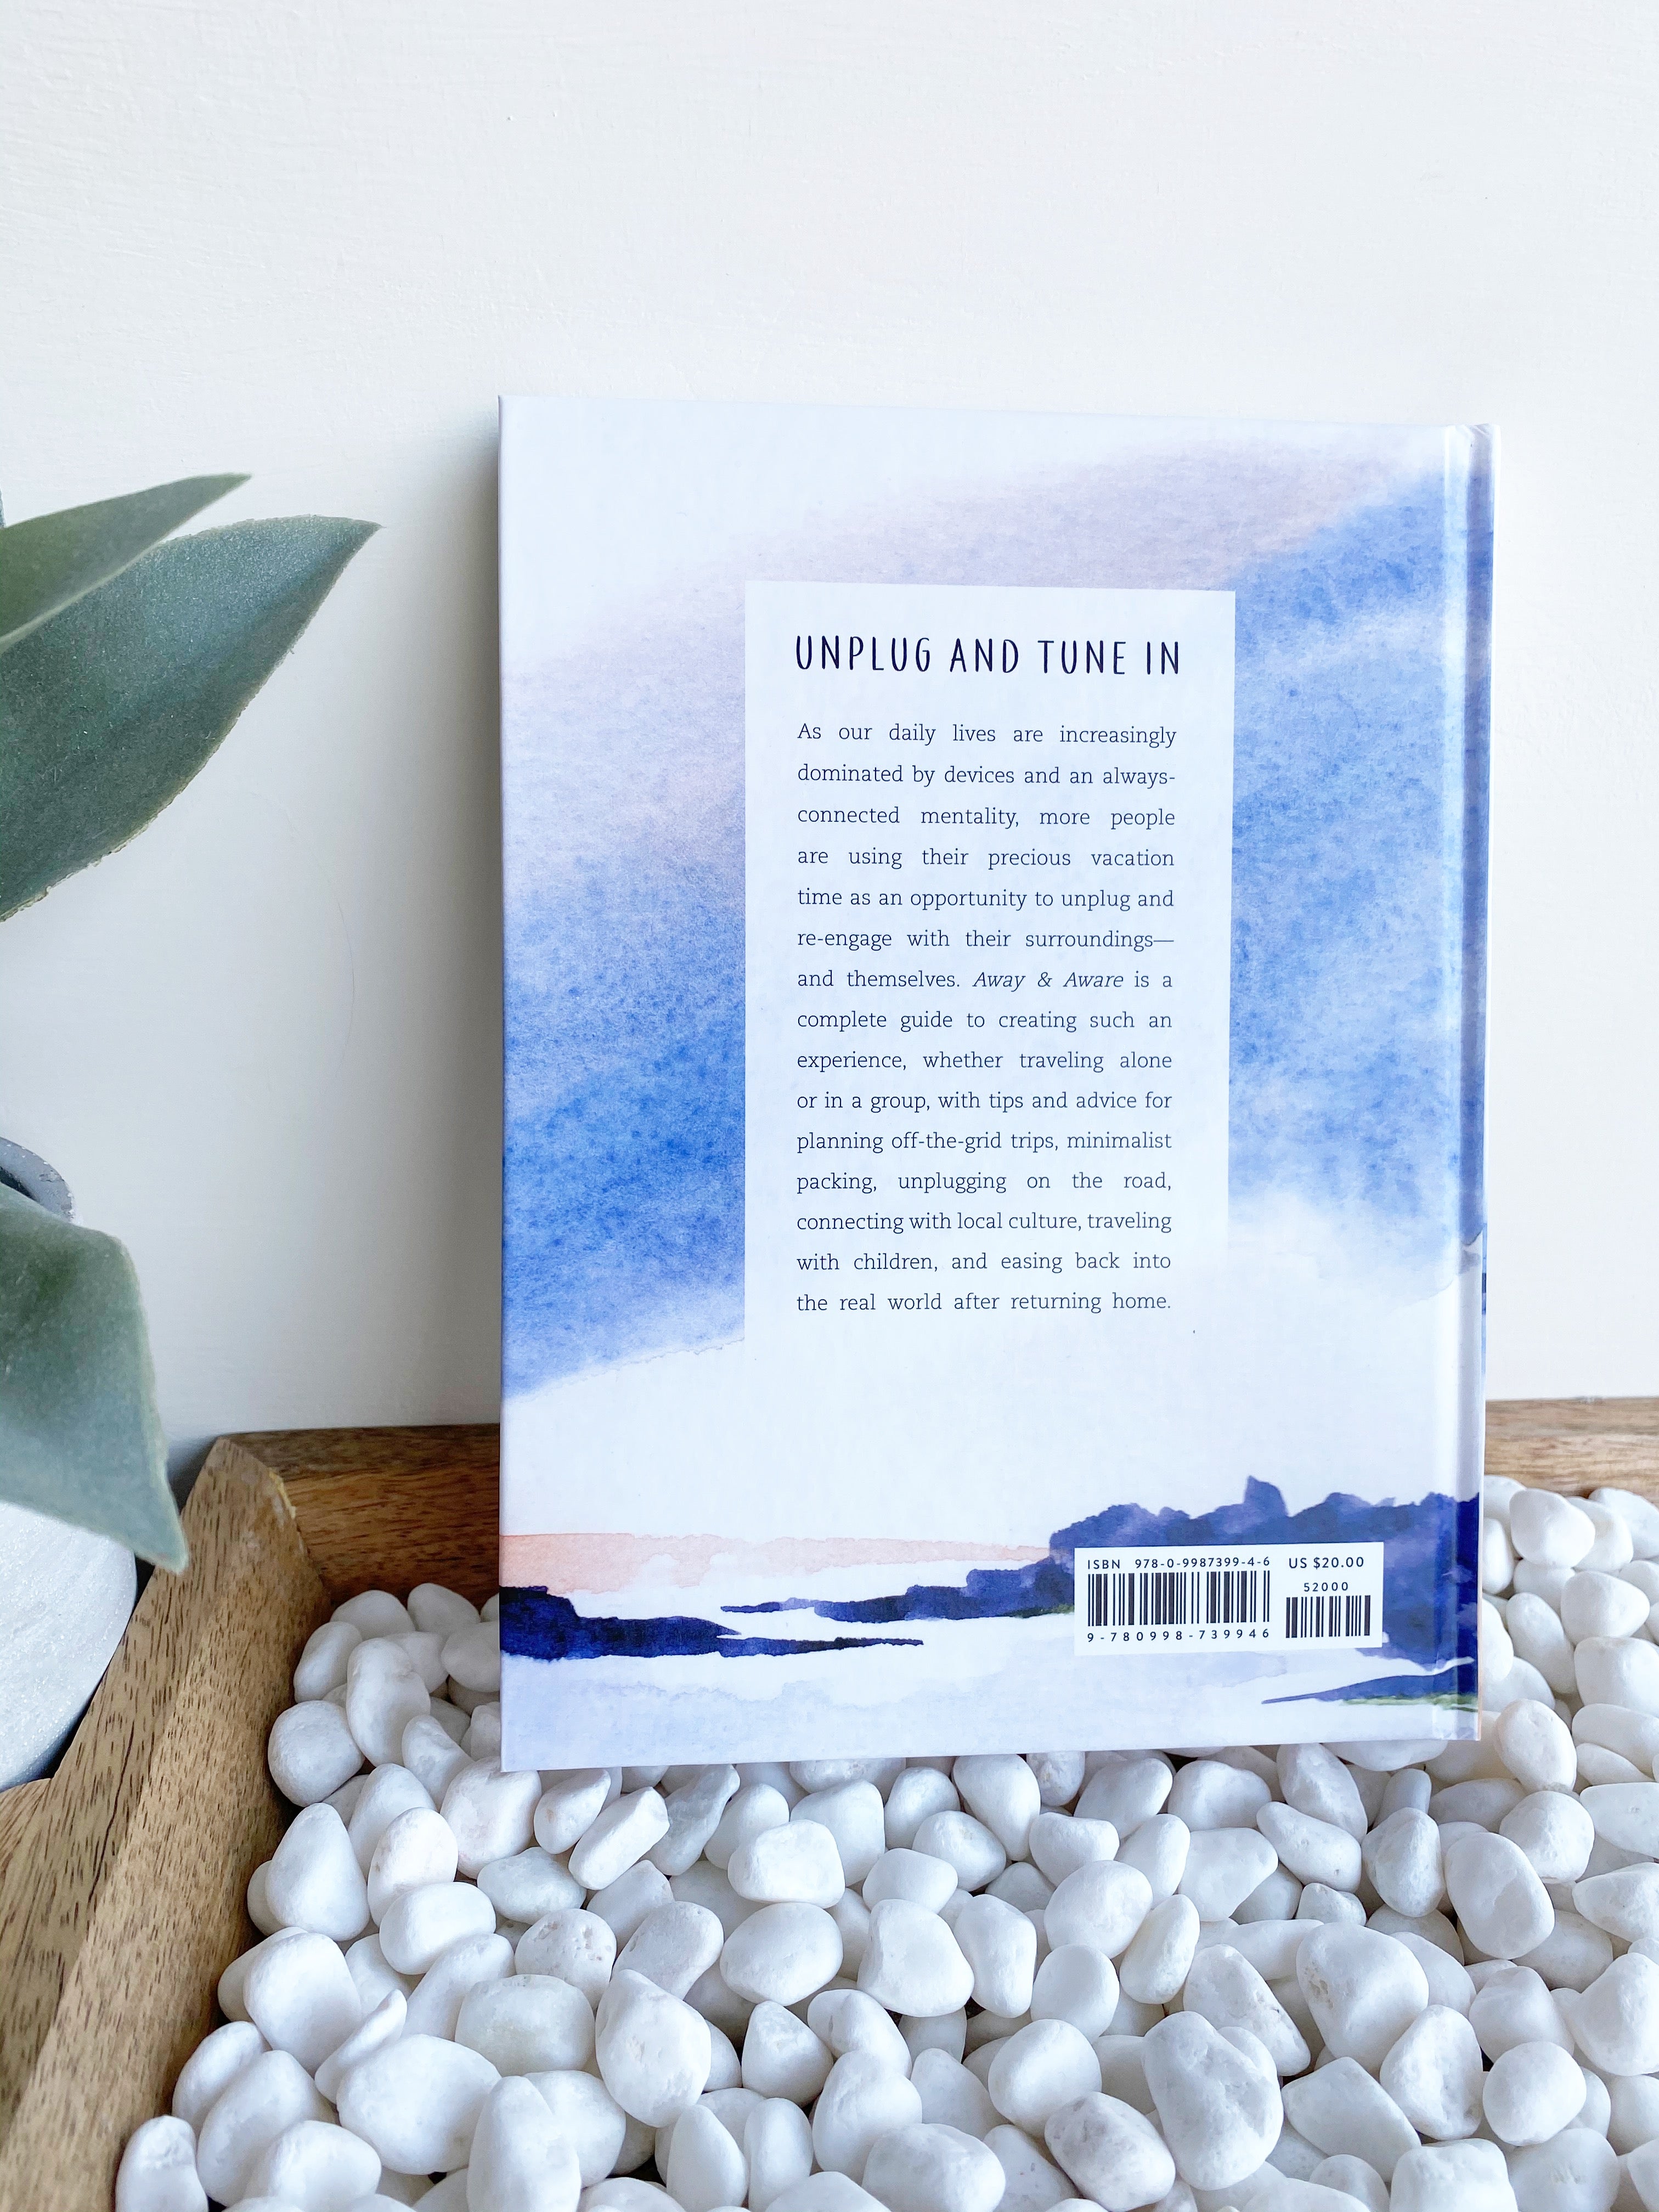 The hardcover book sits upright against a white wall, sitting atop a wooden tray filled with white pebbles. There is a green plant peeking over the left side. There is abstract light and dark blue artwork with a white rectangle over it. Inside the rectangle is black text in a paragraph describing the book. There is a barcode in the bottom right corner.